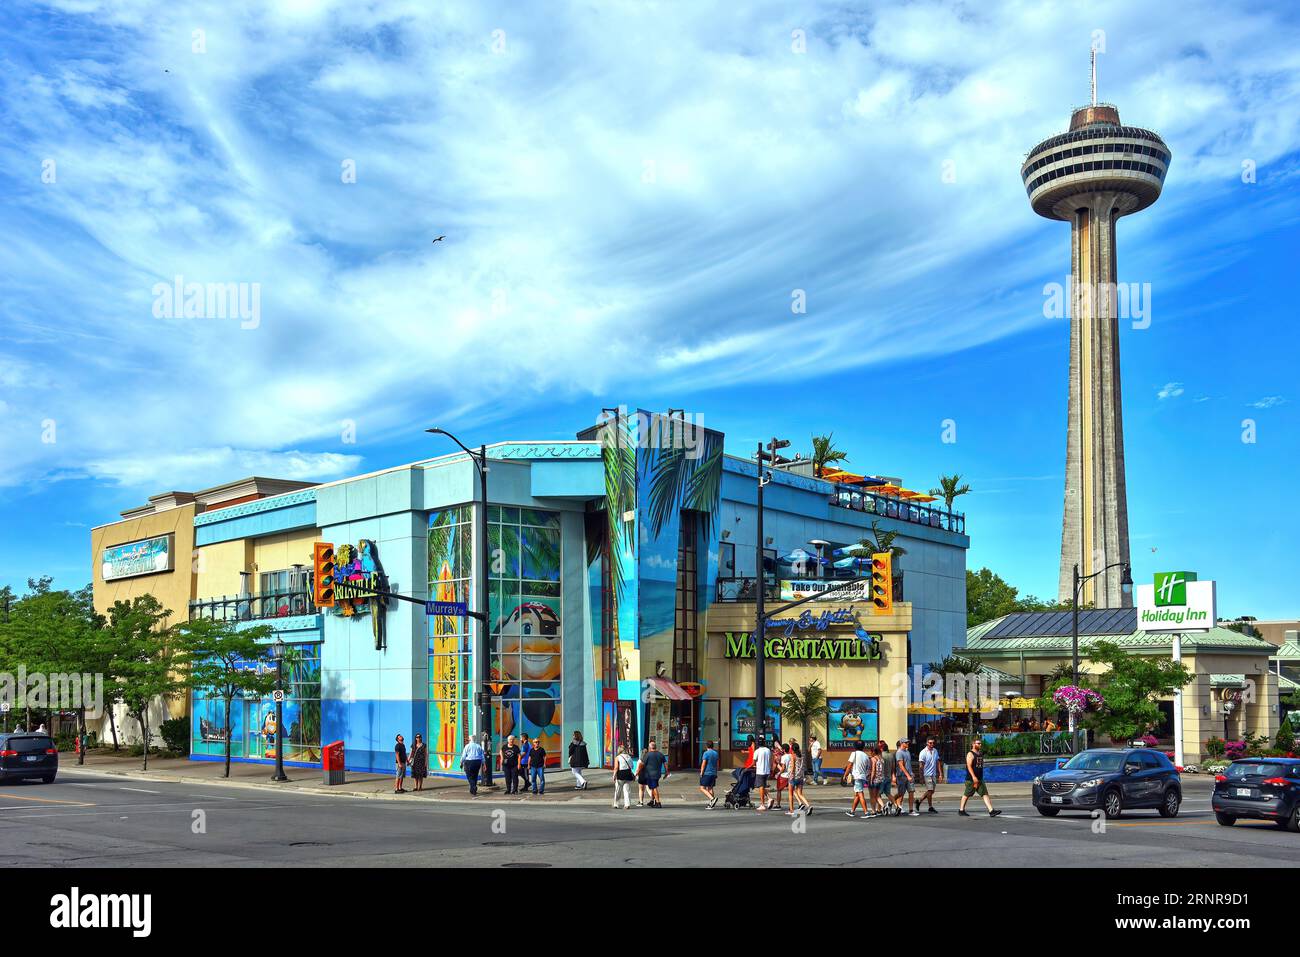 Niagara Falls, Canada - August 13, 2022:  Margaritaville restaurant and bar on Fallsview Blvd is one of a popular chain of casual dining restaurants o Stock Photo